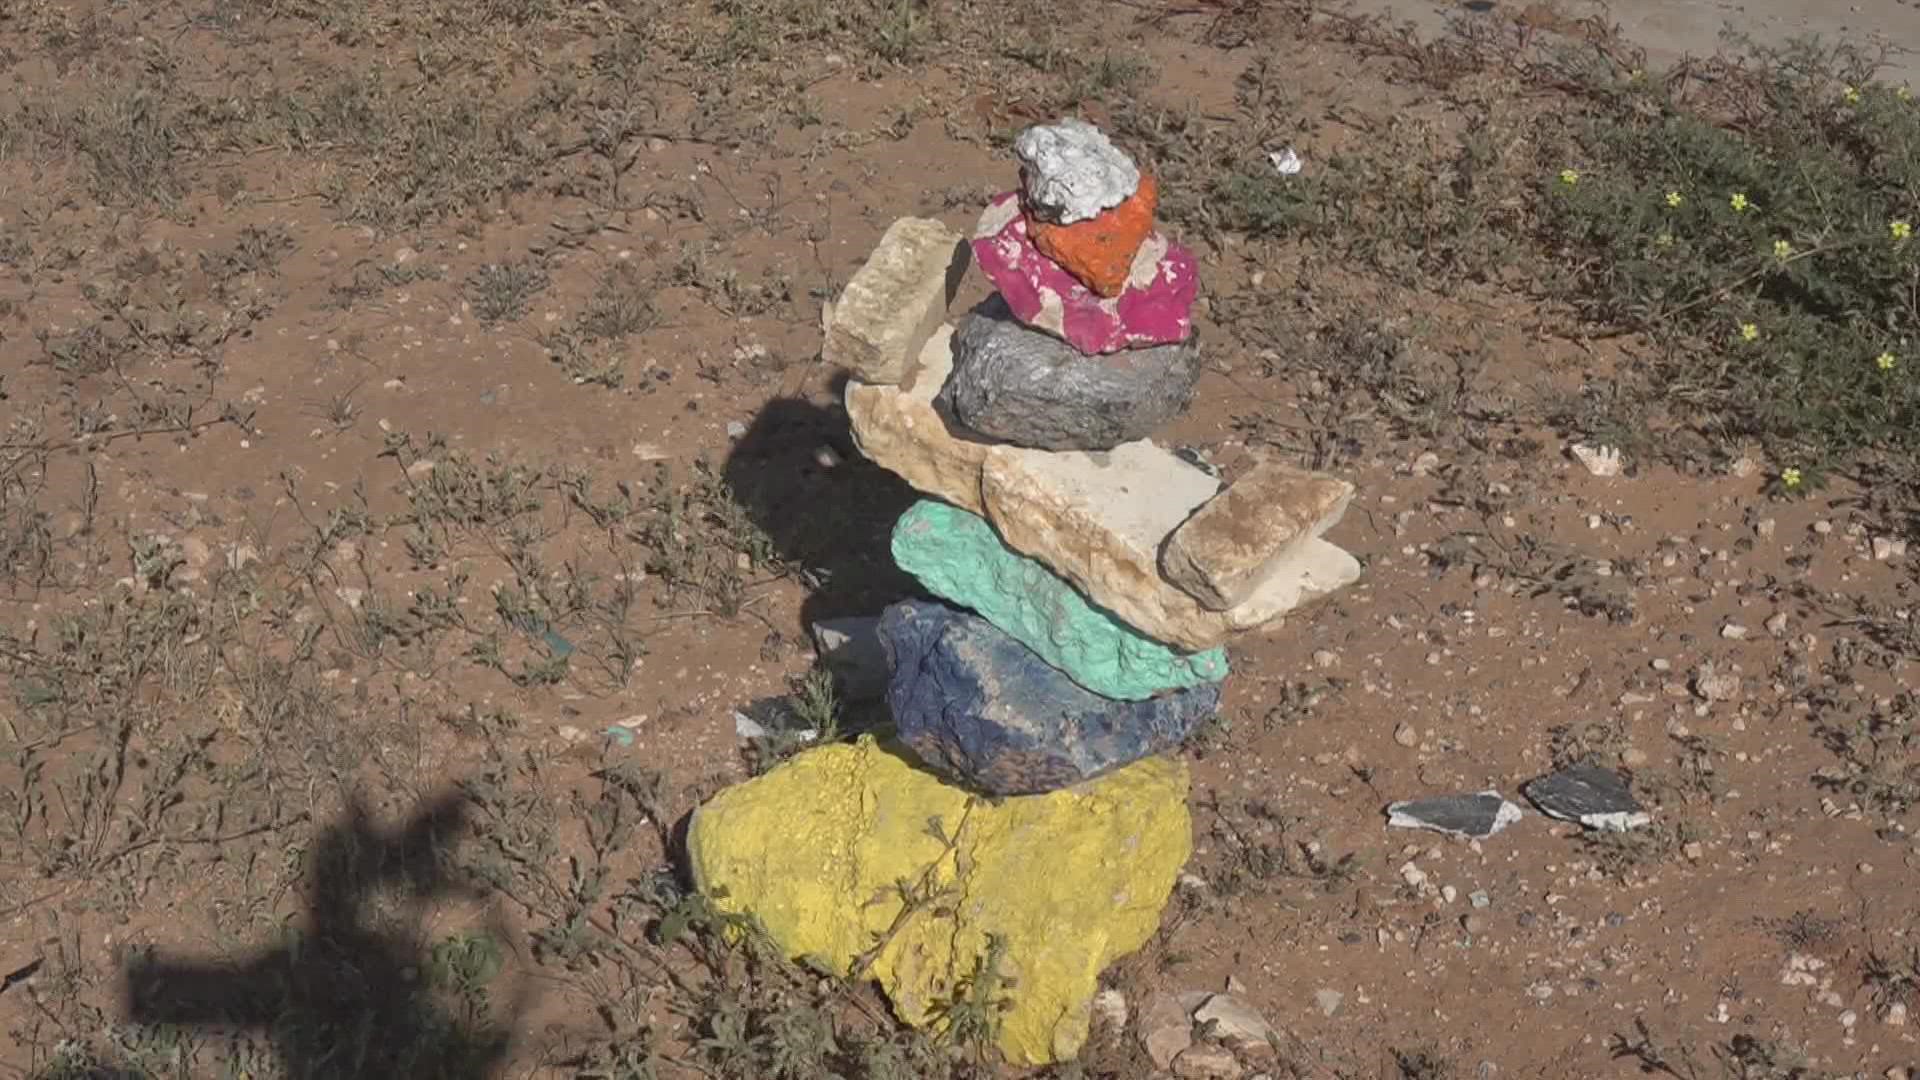 No one knows who created the rock stacks, but the community has been enjoying the art.